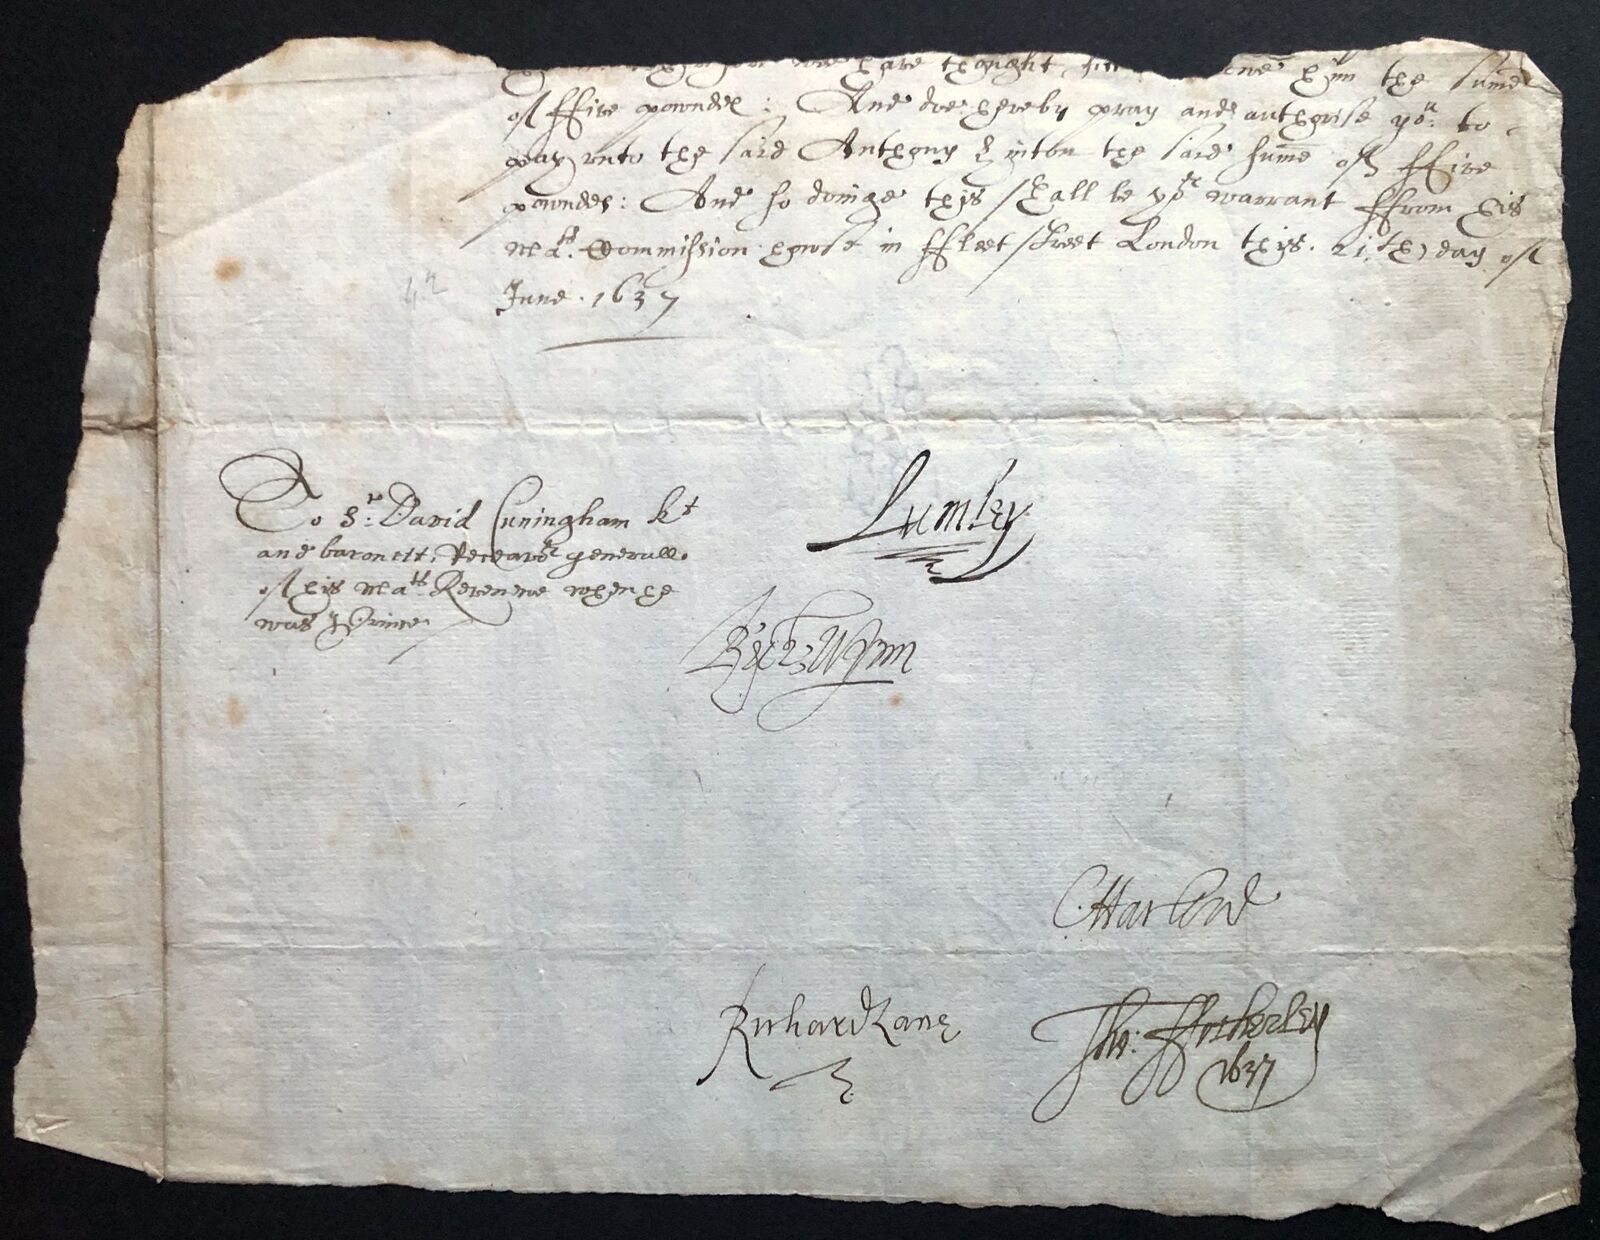 Sir Richard Lane / Portion of handwritten legal document from 1637 signed